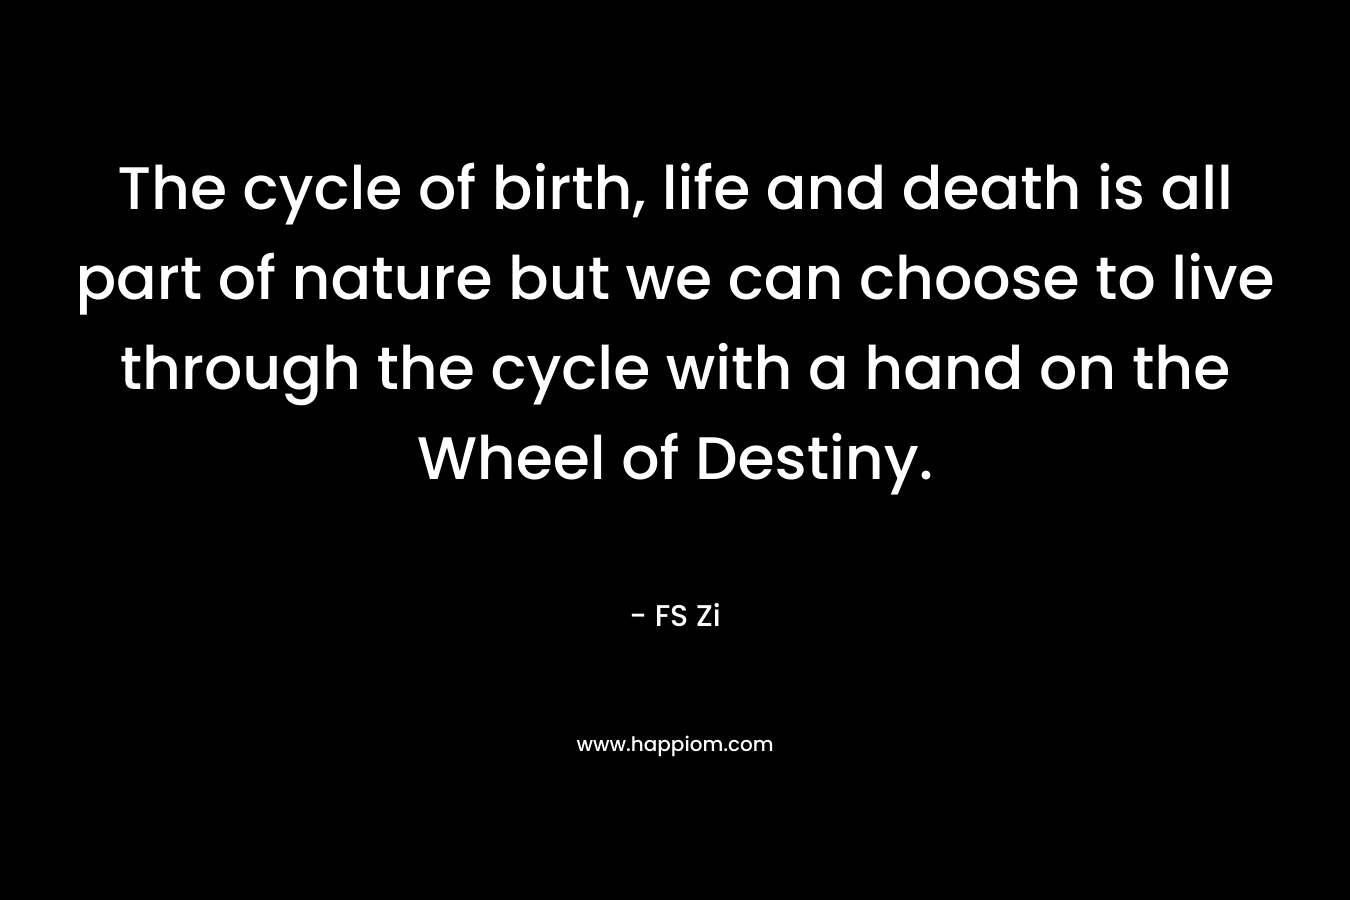 The cycle of birth, life and death is all part of nature but we can choose to live through the cycle with a hand on the Wheel of Destiny.